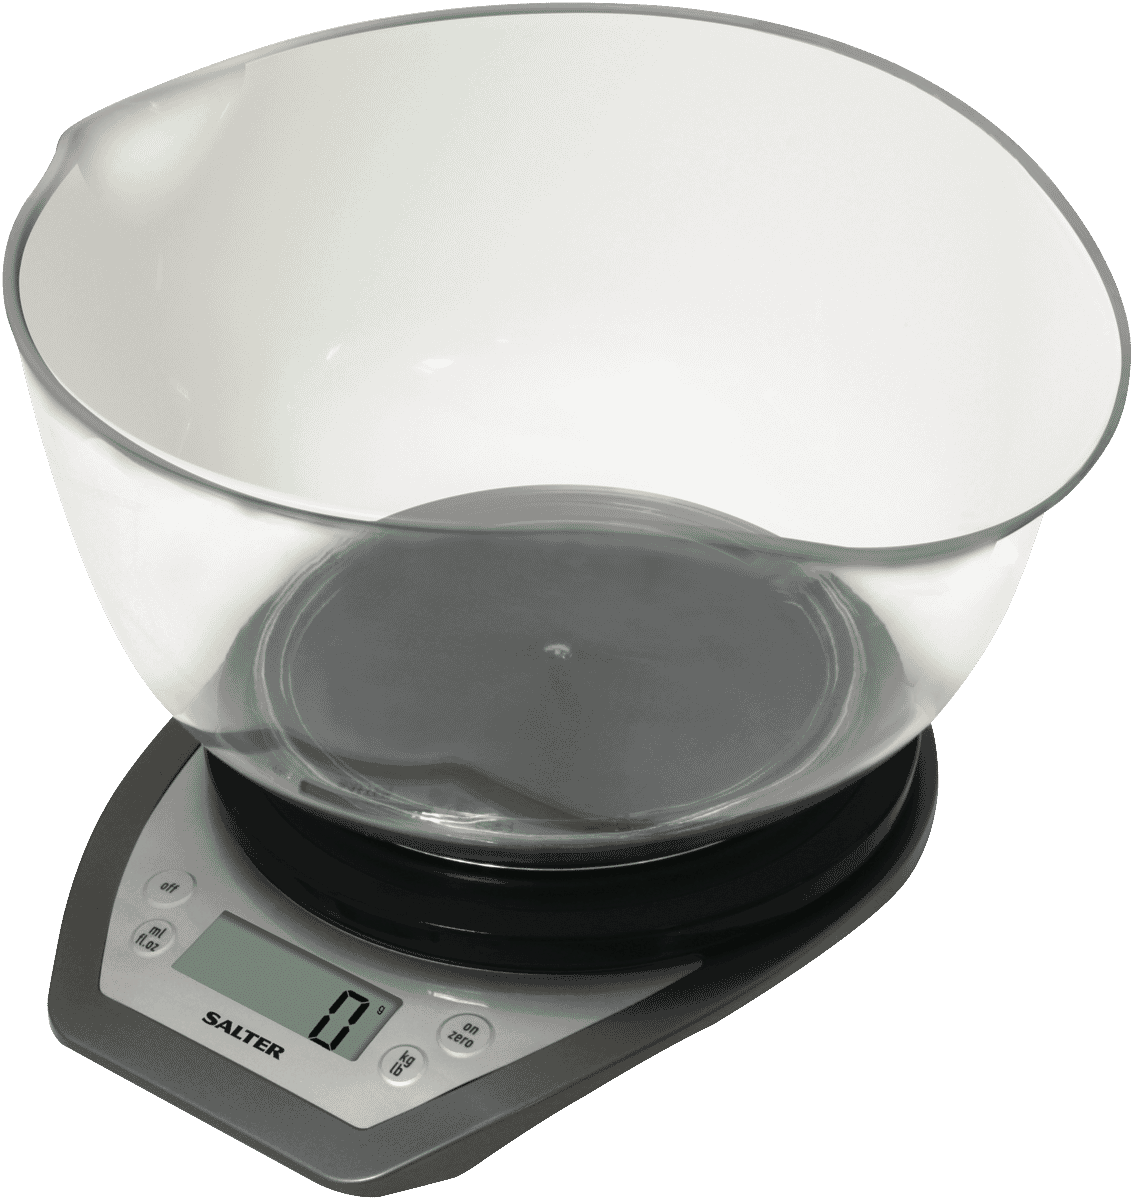 Black Black & Tala Cake Cooling Tray 41 x 25cm x 3 Aluminium Morphy Richards Kitchen Scales 3-in-1 Digital Scales with Jug Equip Range 